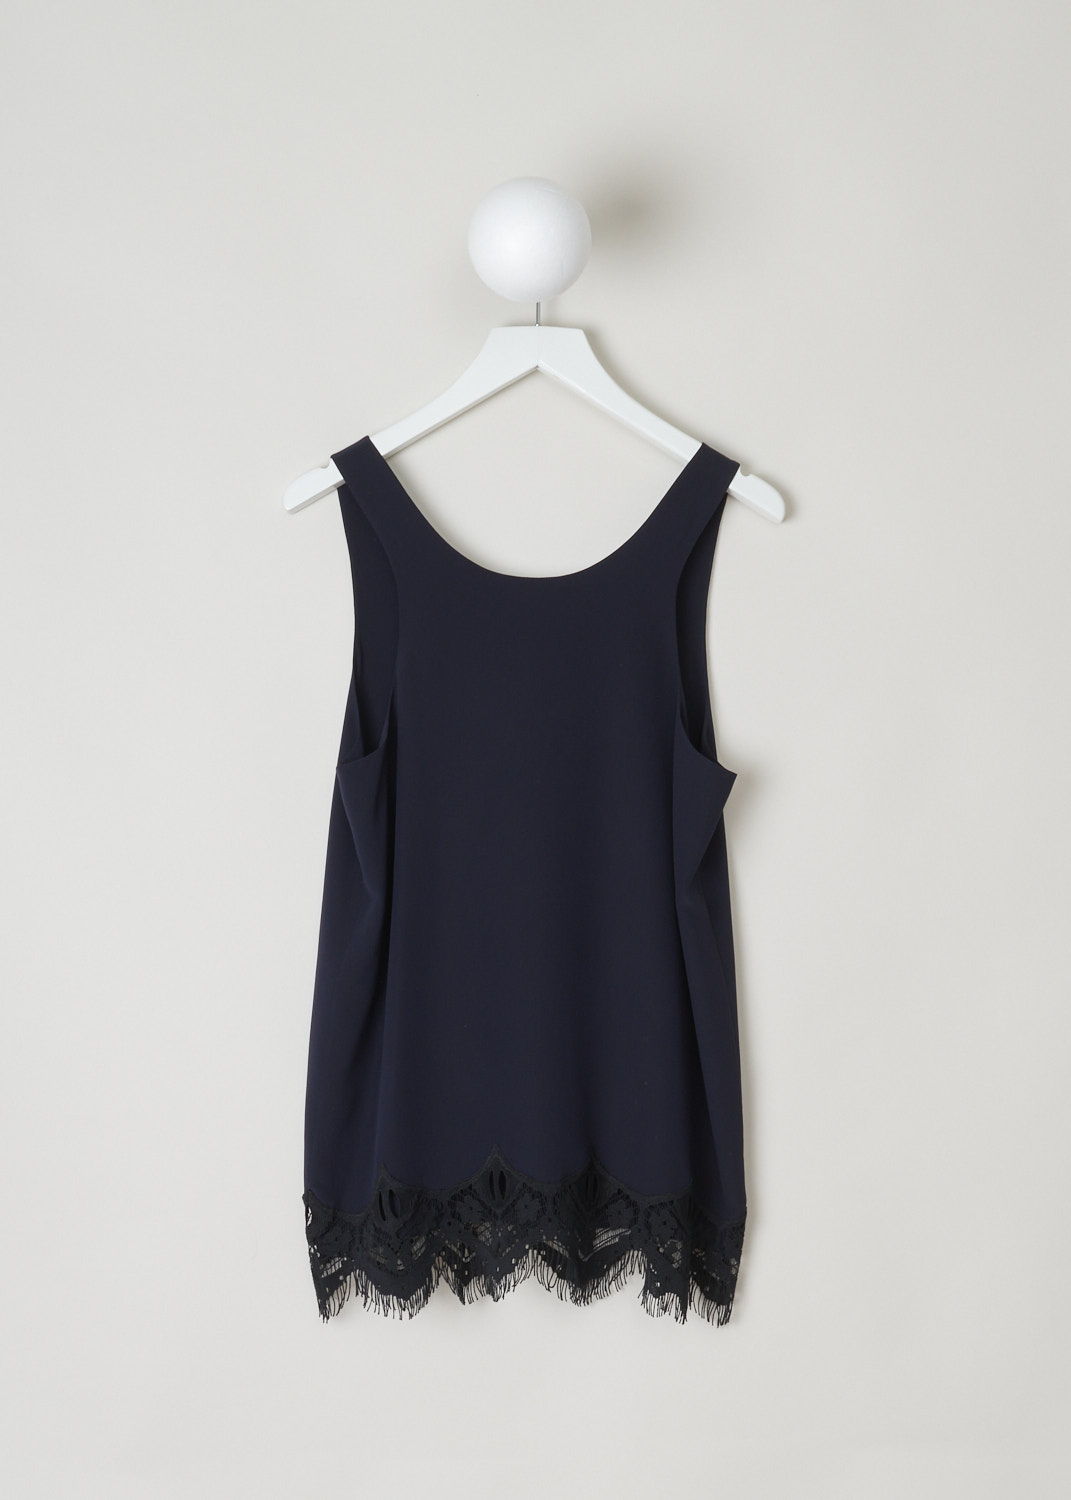 ChloÃ©, Navy tank-top with black lace detailing, 16EHT92_16E004_7V1_navy_black, blue, back, A lovely basic being this navy tank-top. Featuring a scoop neckline, and has a lace decorated hem. 